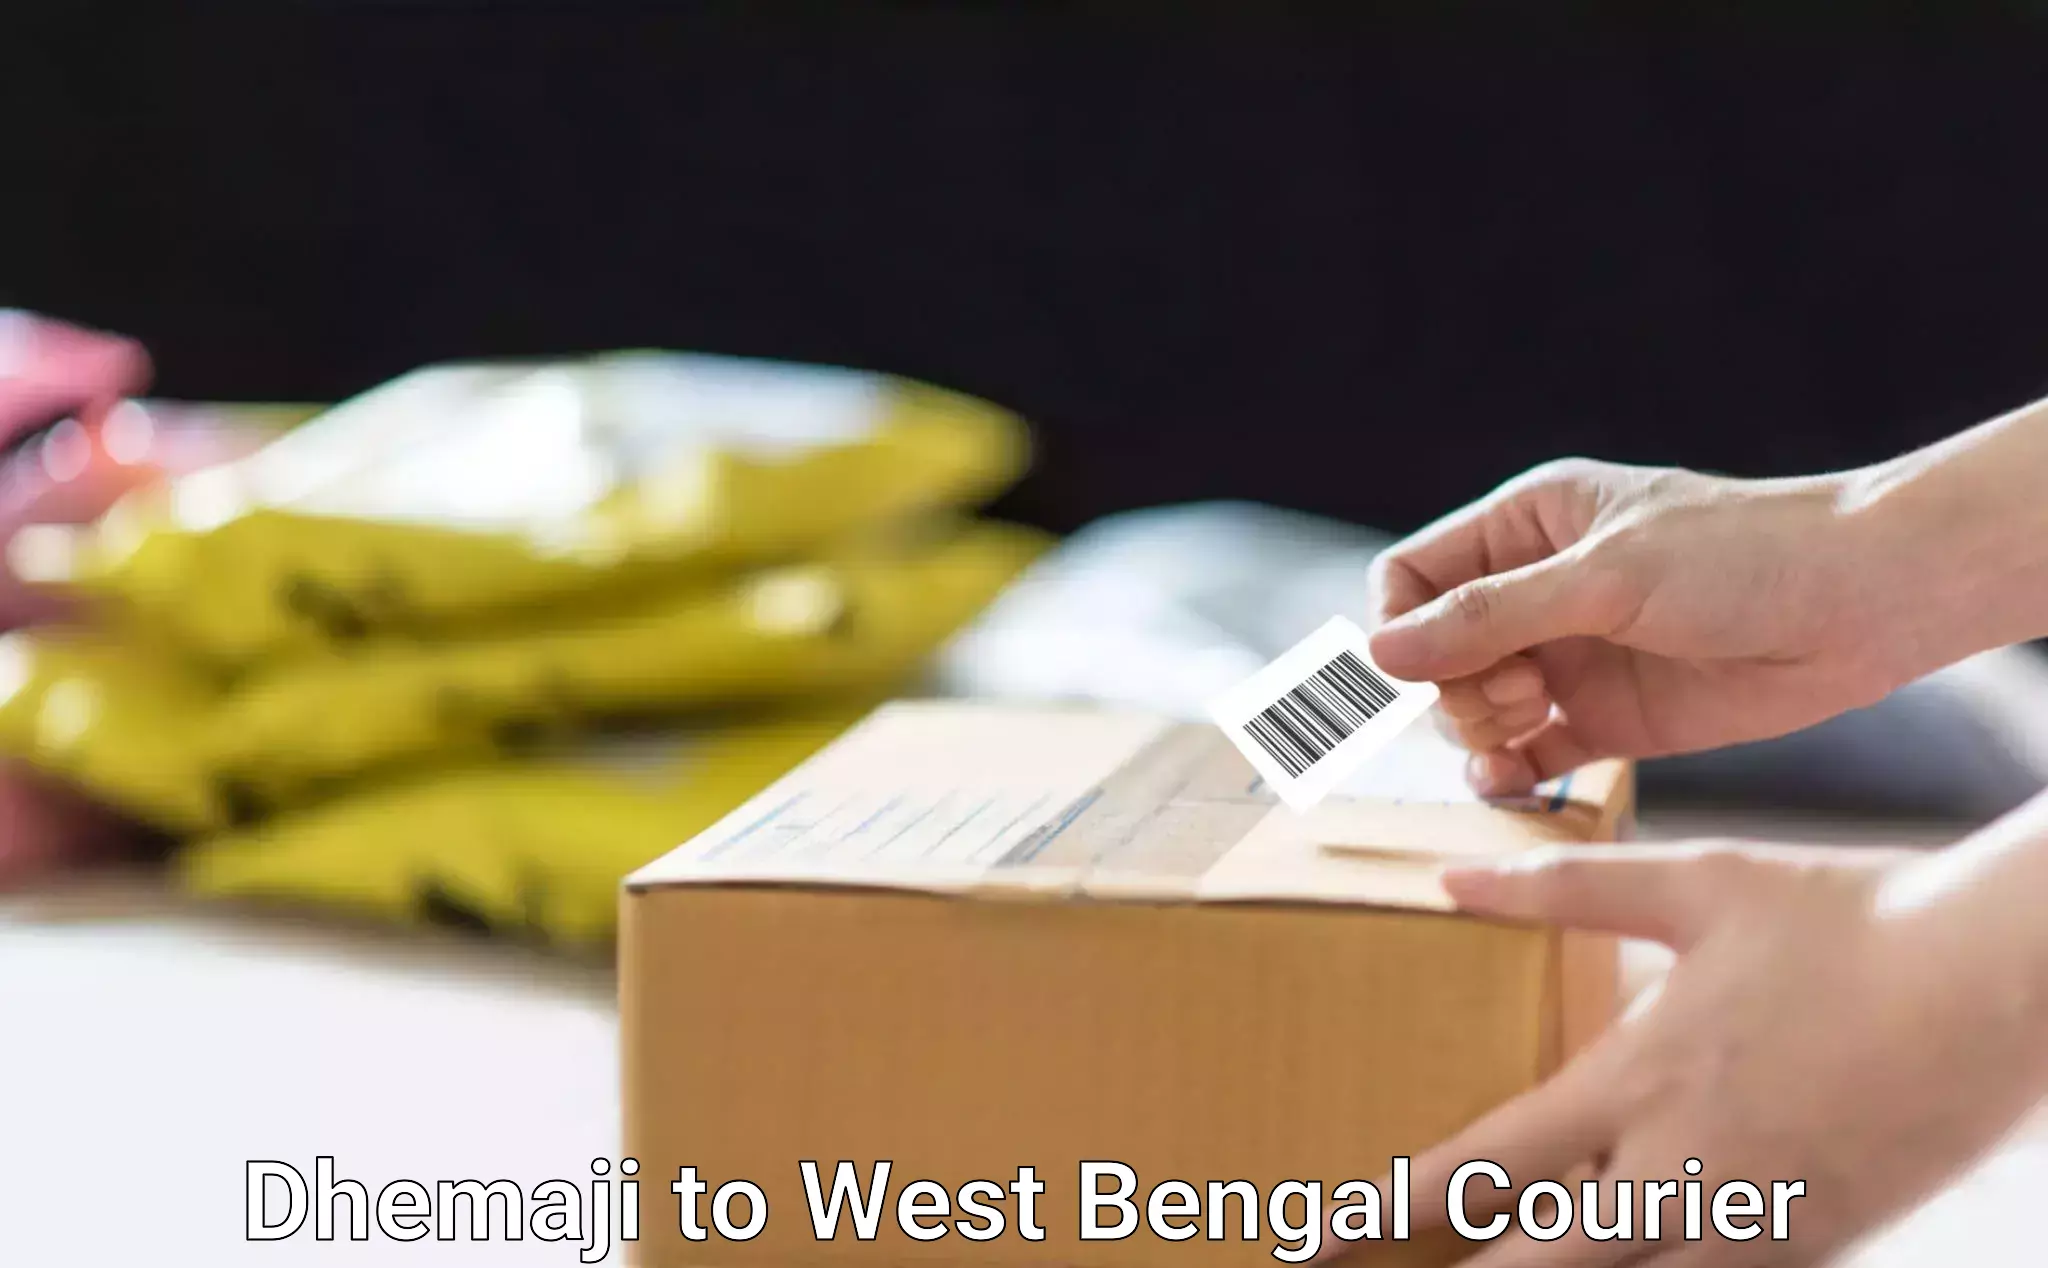 Cost-effective courier solutions Dhemaji to Kolkata Port